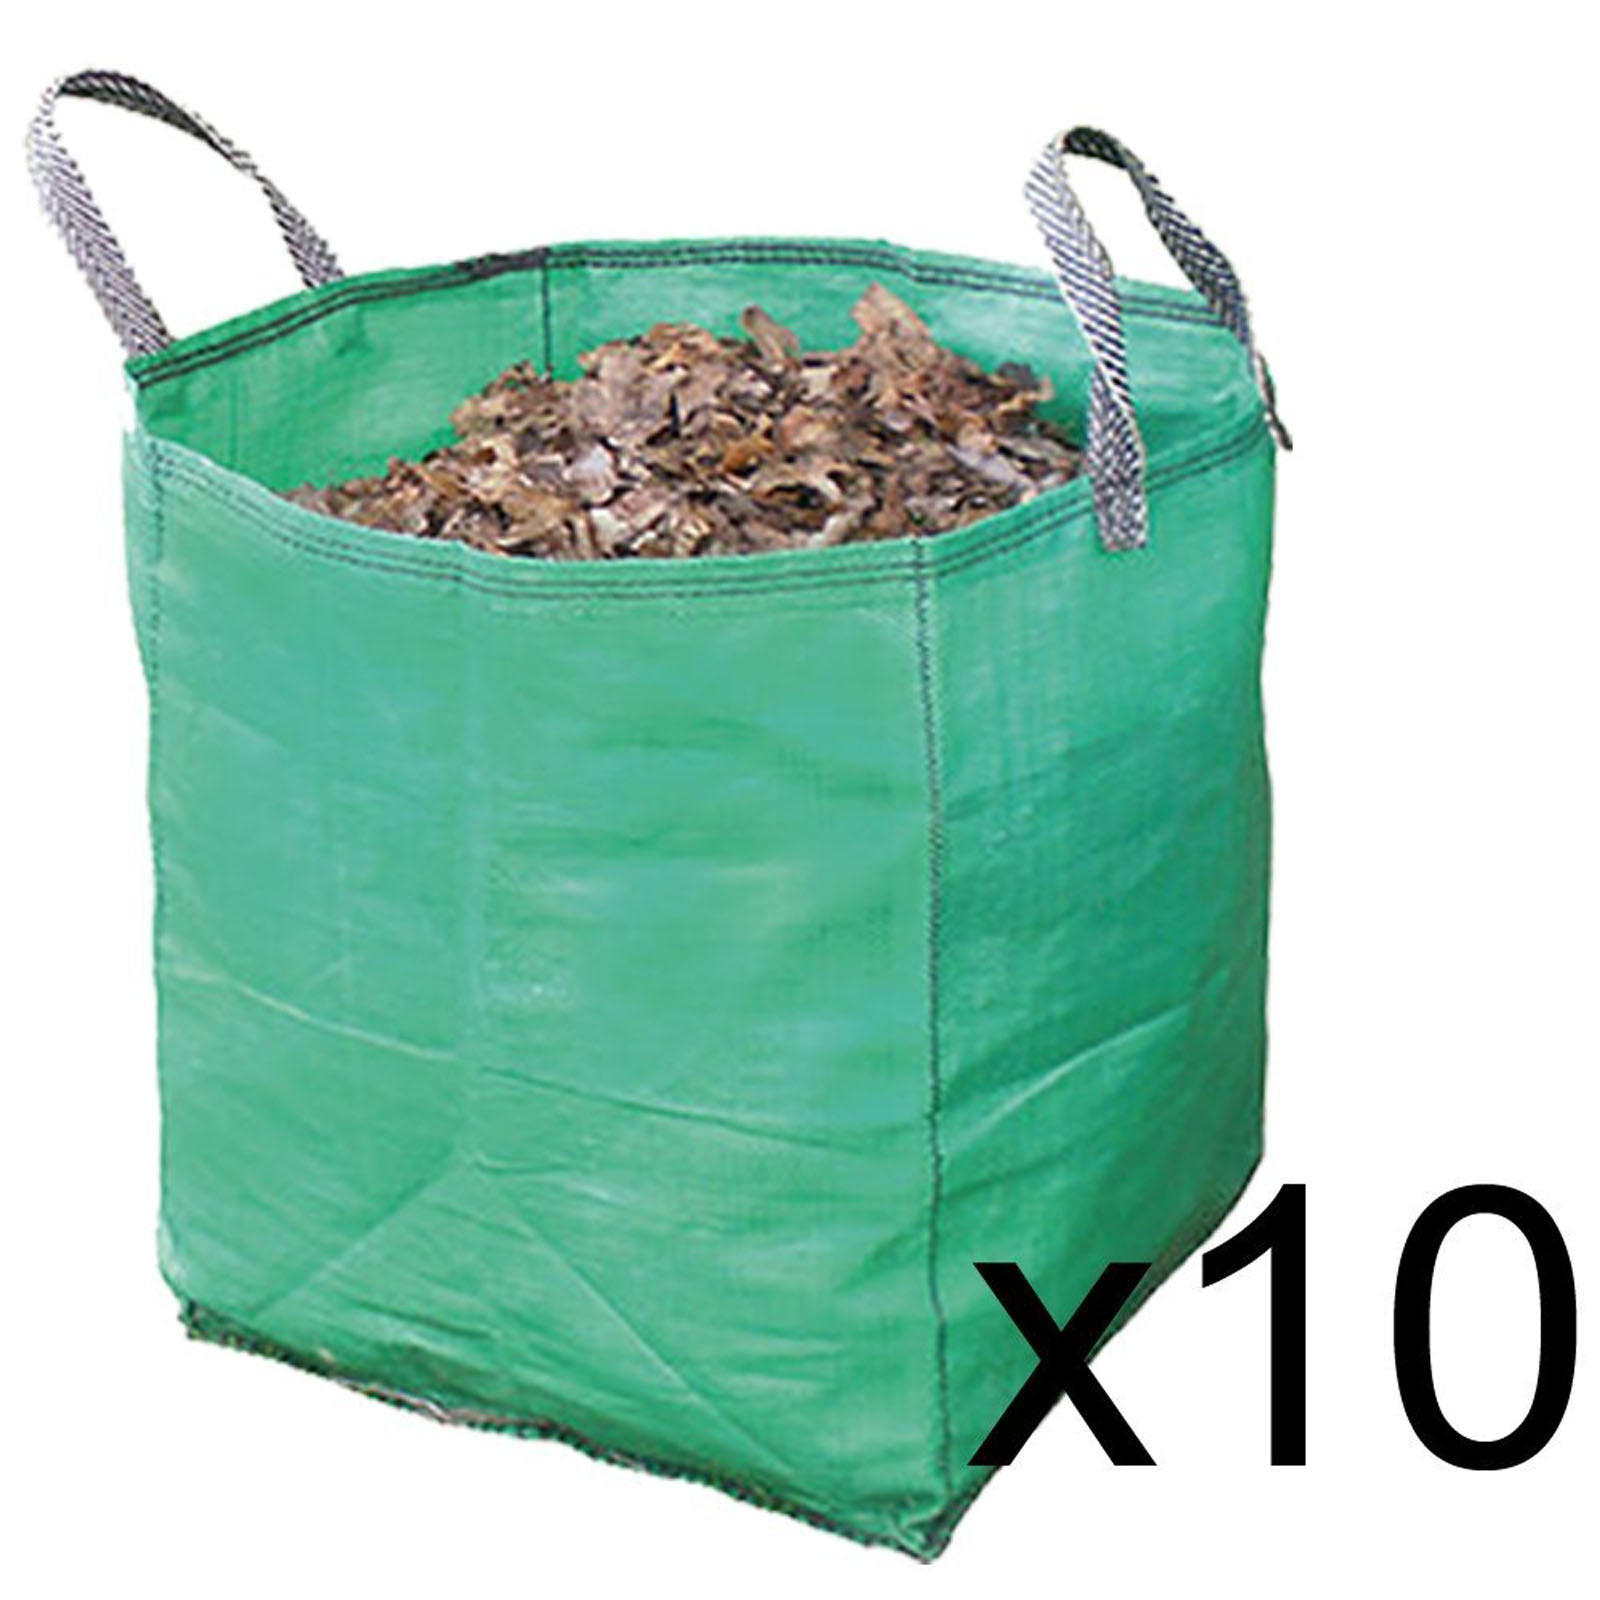 Large Garden Waste Recycling Tip Bags Heavy Duty Non Tear Woven Plastic Sack x 10